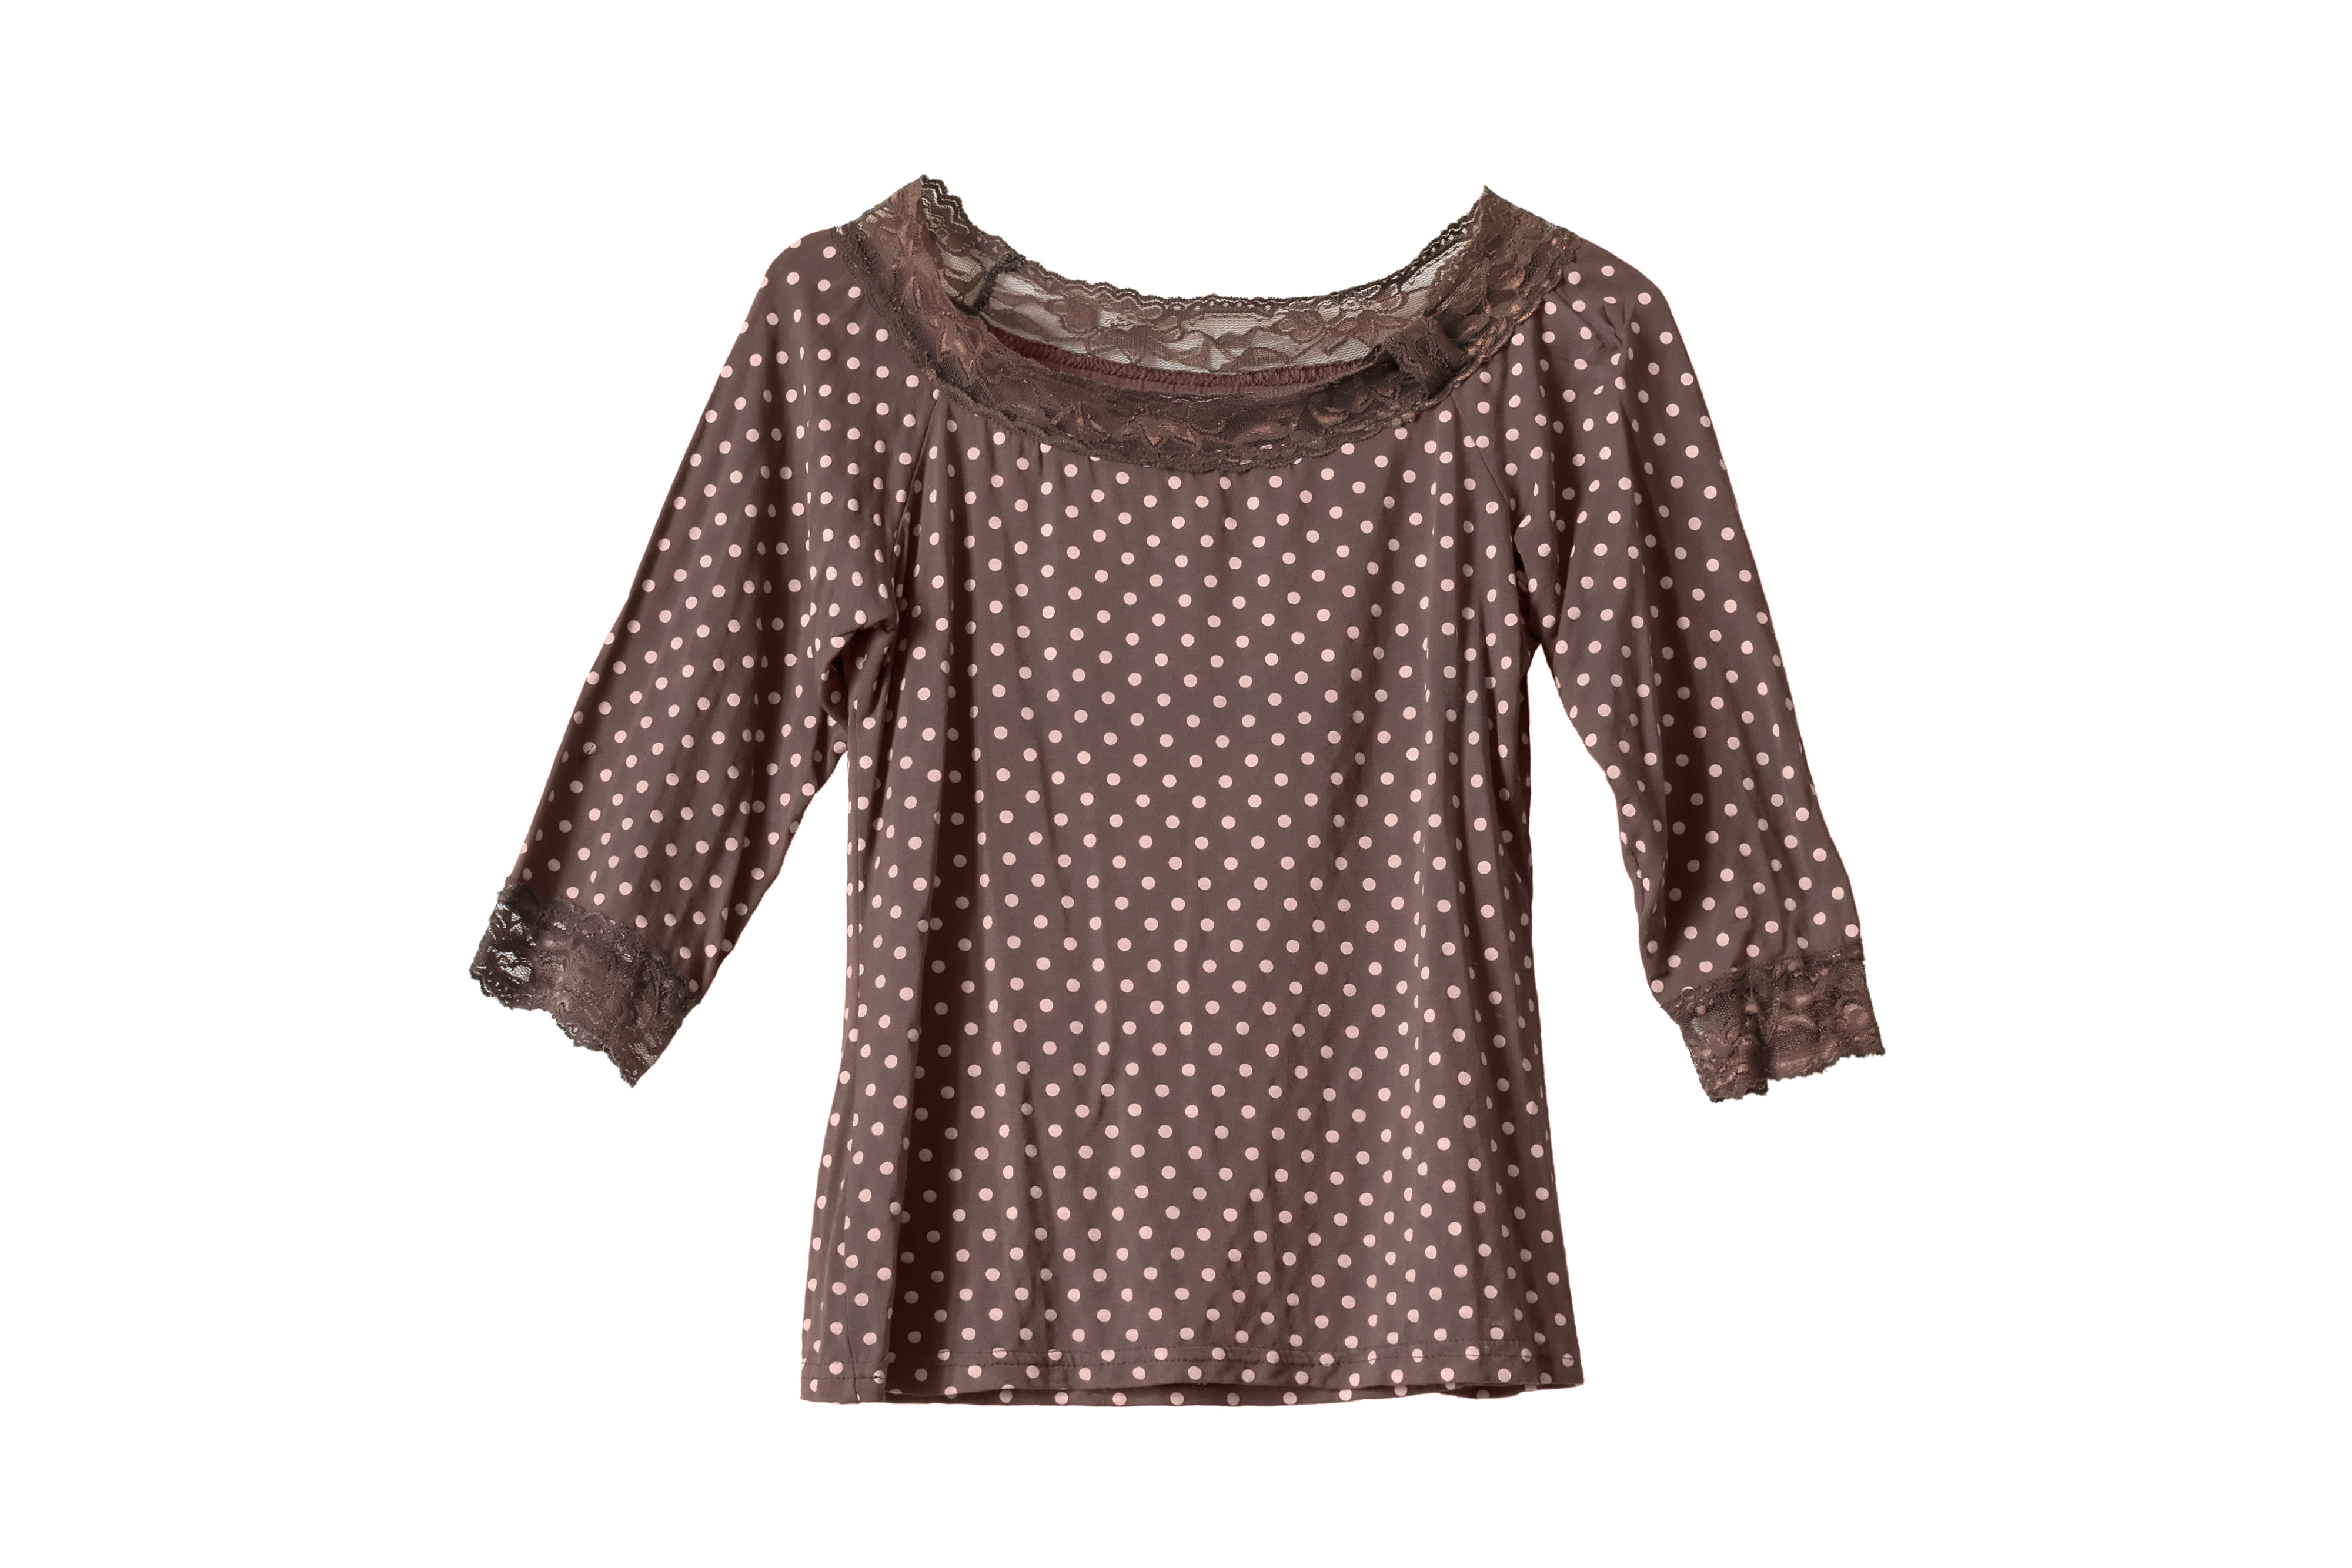 Brown spotted blouse decorated with lace on a white background